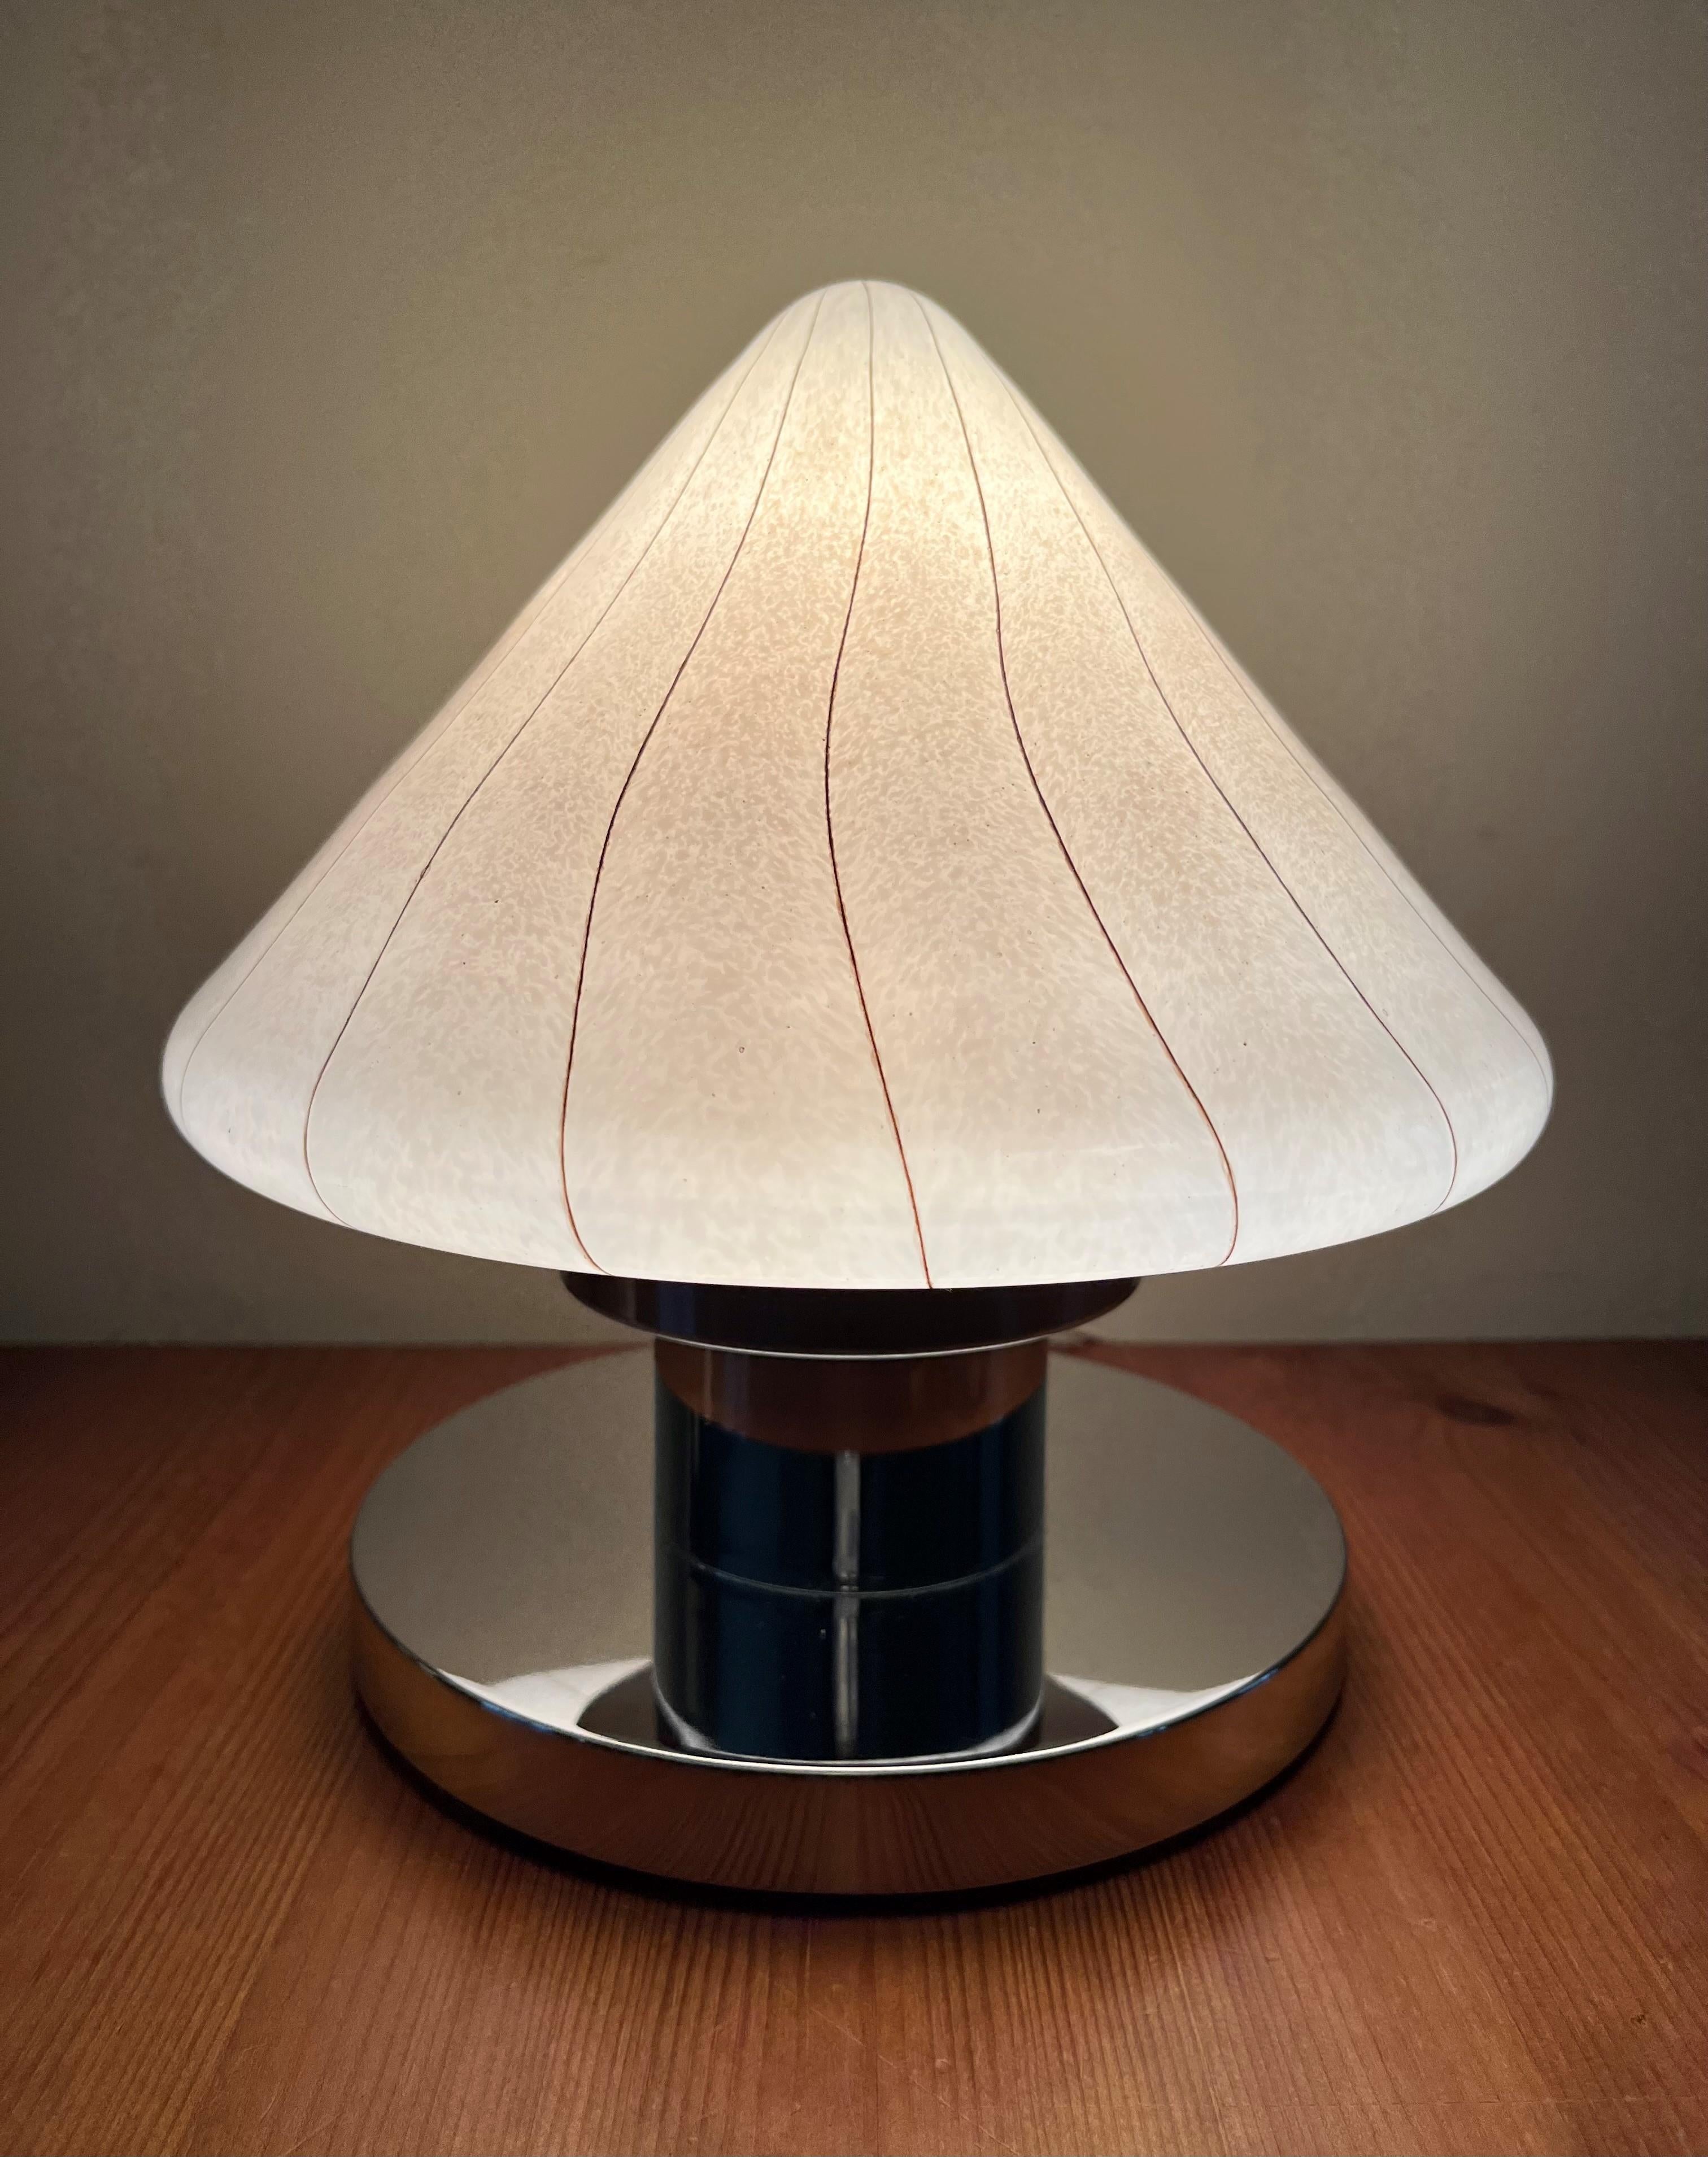 Charming, refined and lovely set of two Italian Murano table lamps. These table lamps were made during the 1970s in Italy. Original sticker label still shows on structure of table lamp.
Each table lamp is composed chromed metal structure and a